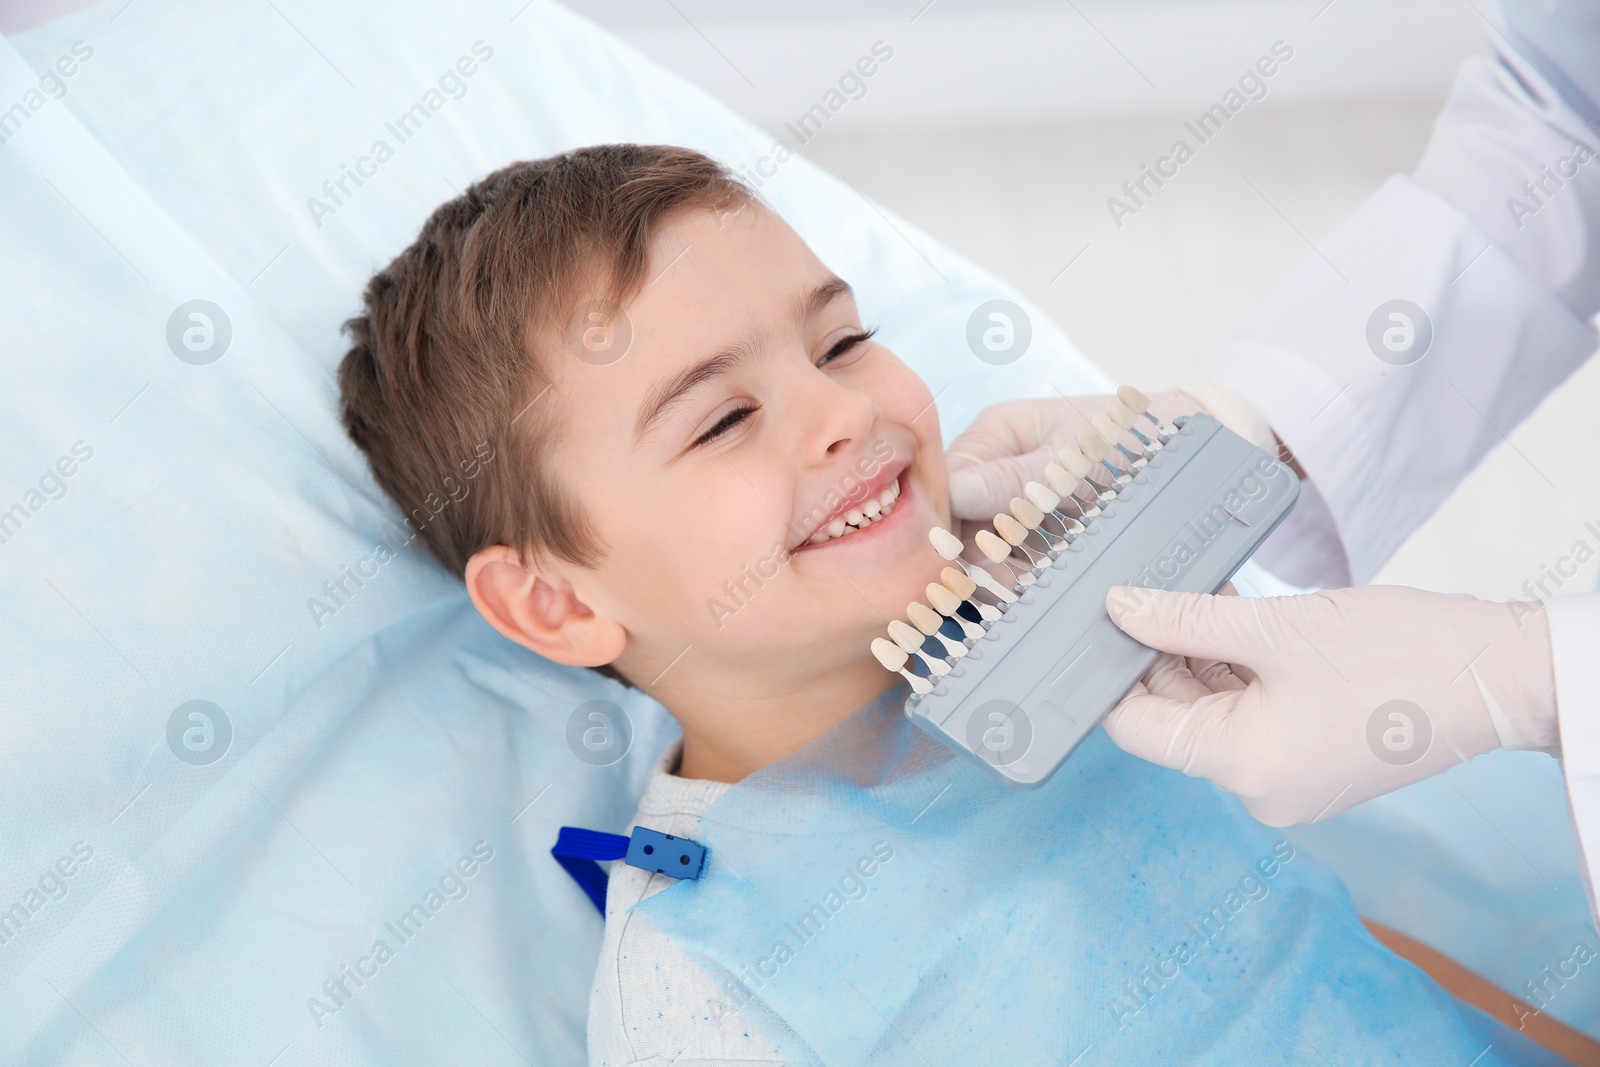 Photo of Dentist selecting cute boy's teeth color with palette in clinic